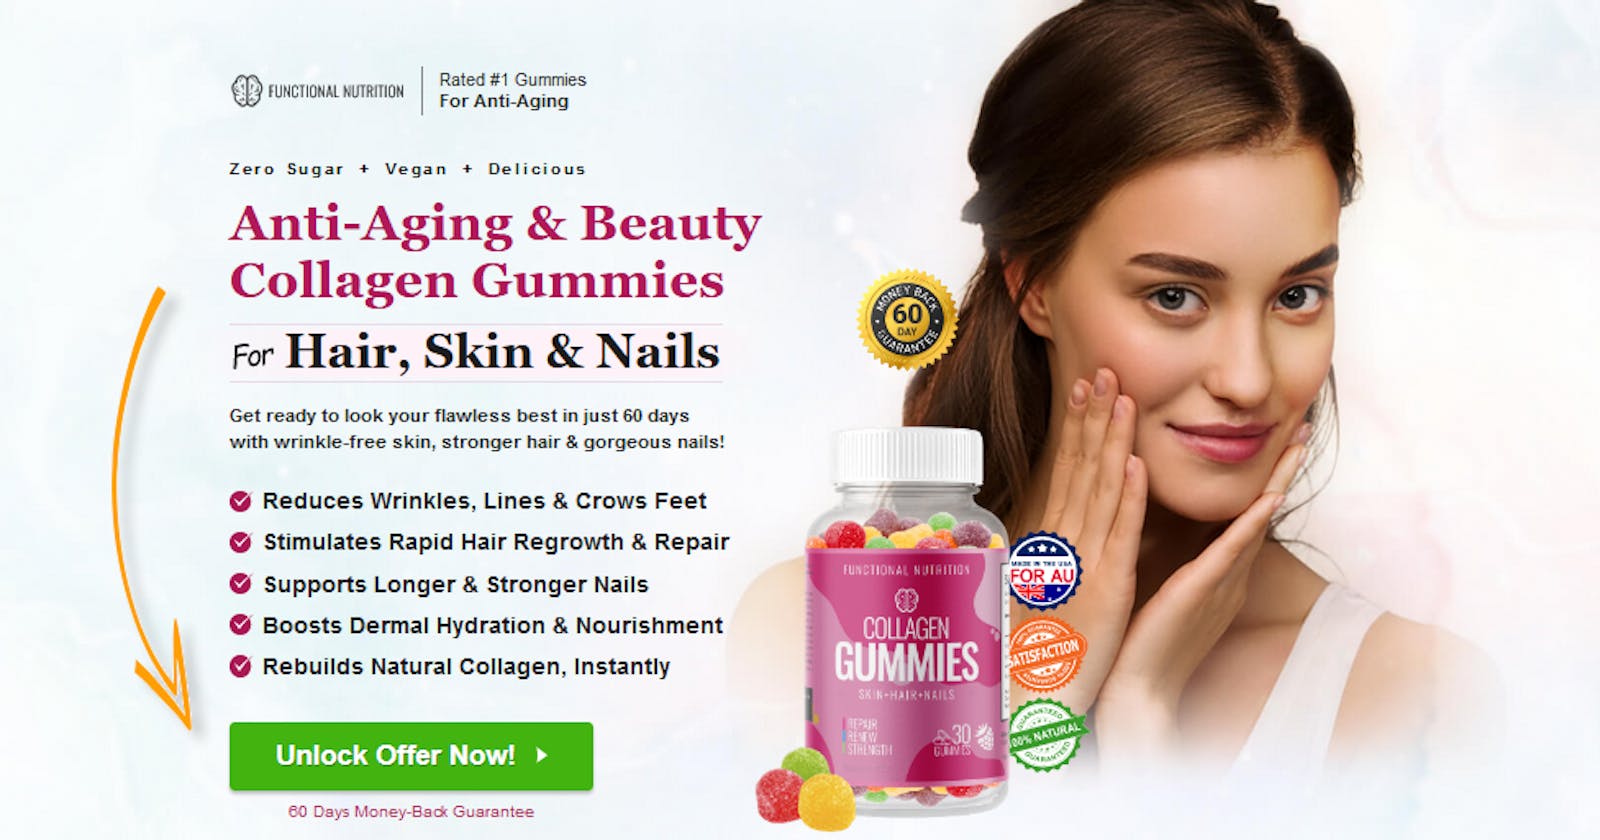 Functional Nutrition Collagen Gummies Reviews Rebuilding Skin, Nails, And Hair Health Instantly! Scam Alert!